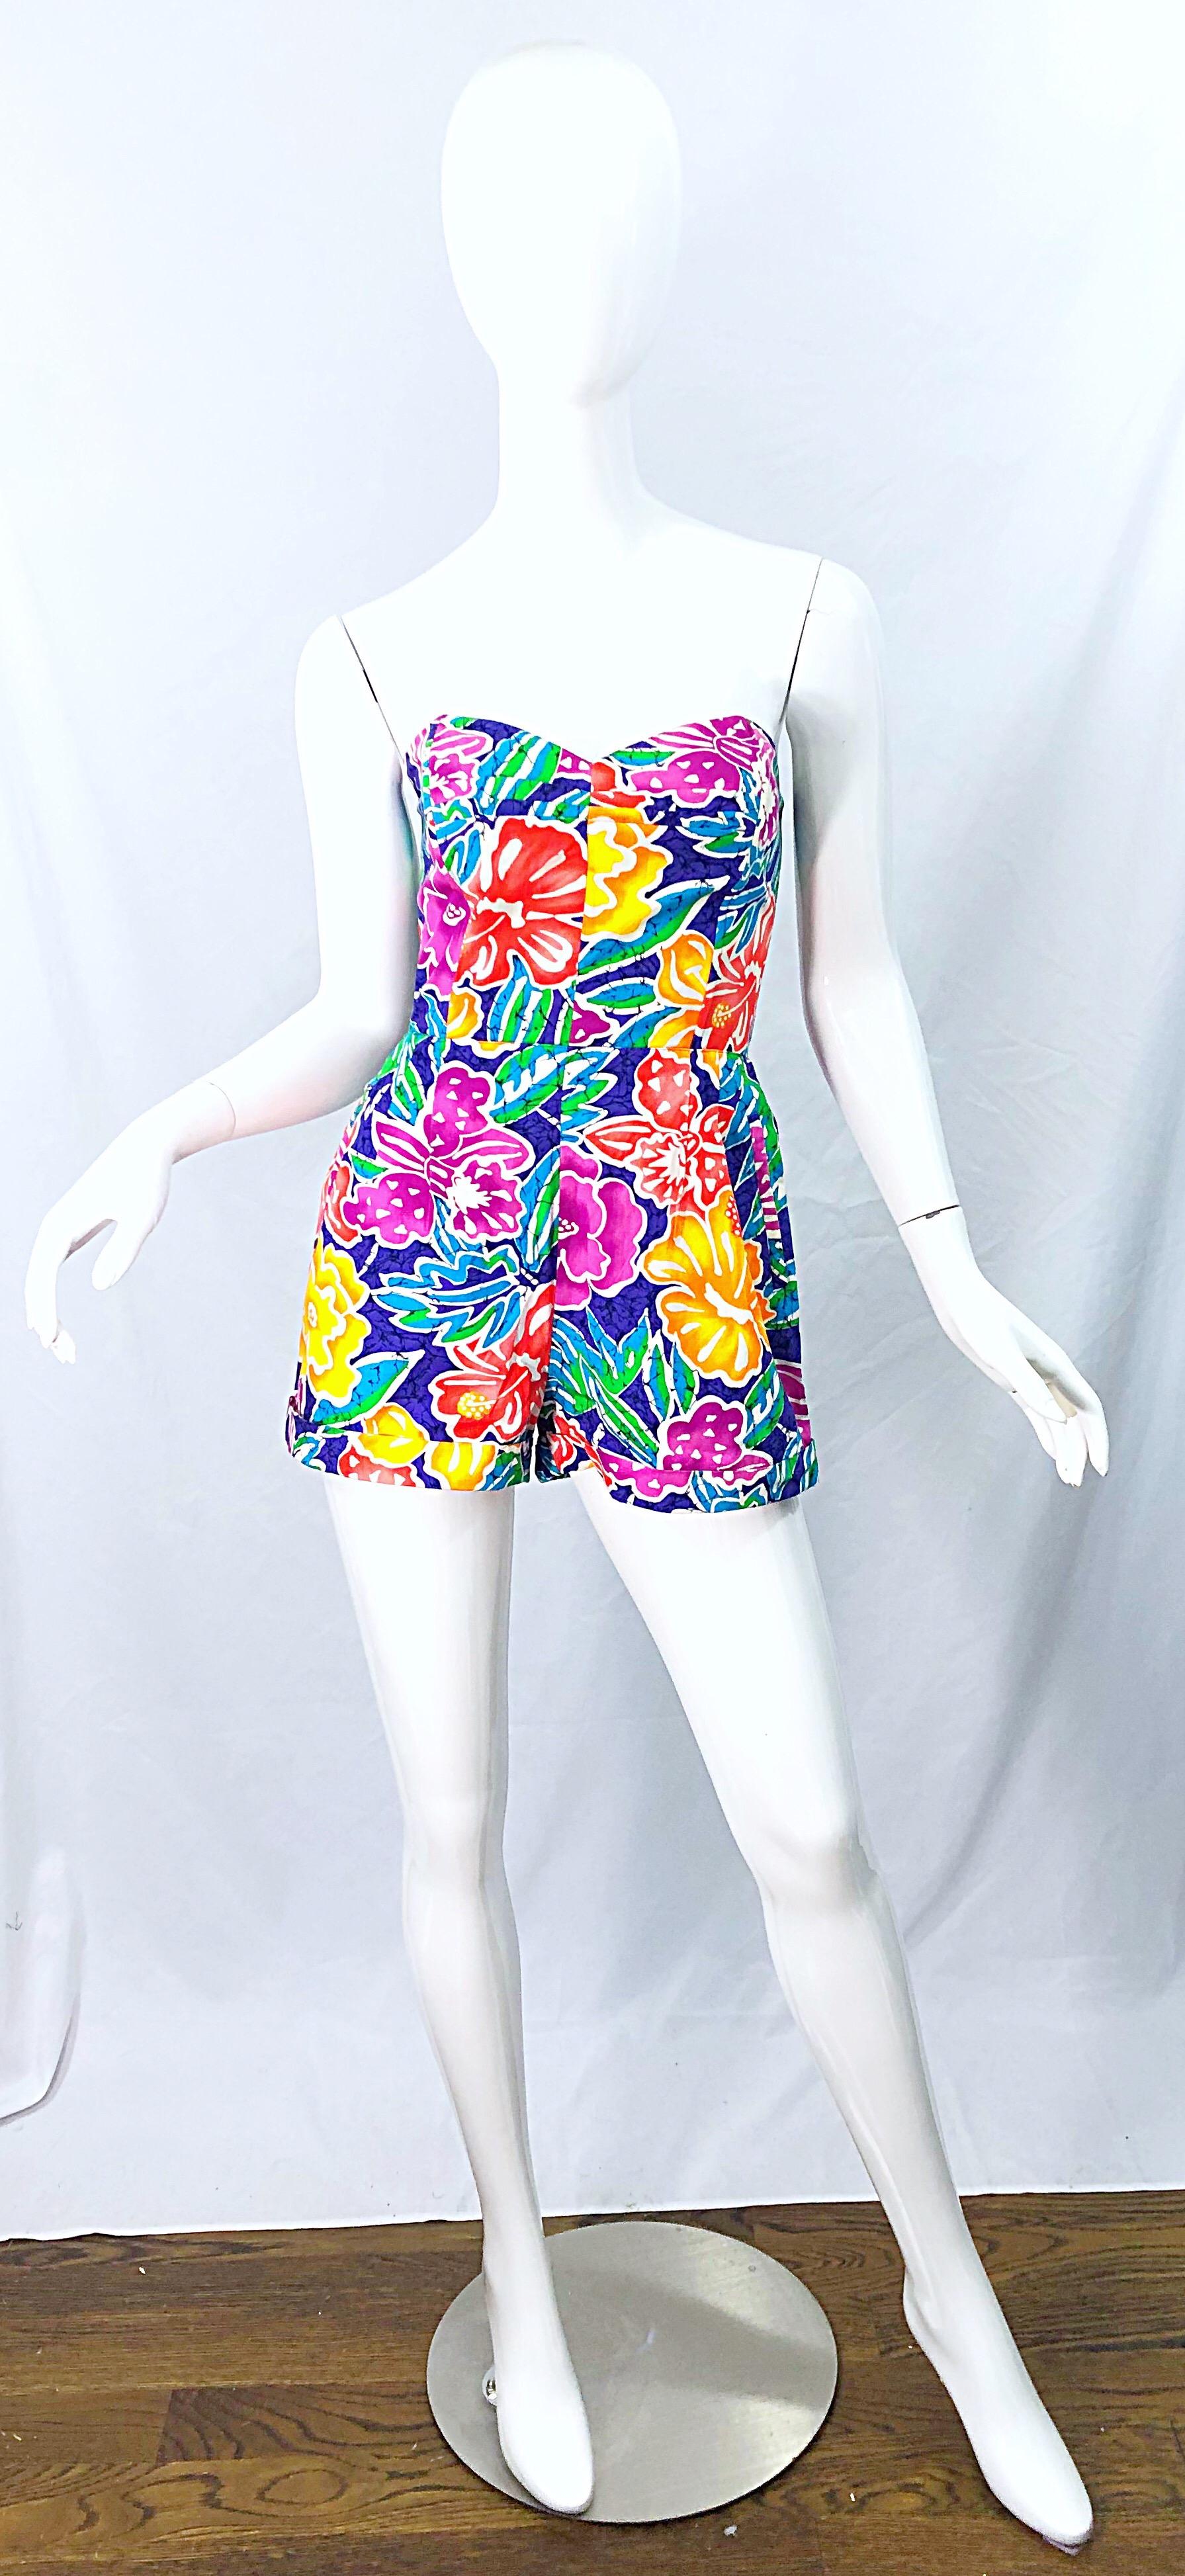 Chic 1980s does 1950s flower Hawaiian print strapless cotton romper / jumpsuit ! Features vibrant colors of purple, pink, yellow, green, orange, white and pink throughout. Pockets at each side of the hips. Boned bodice keeps everything in place.